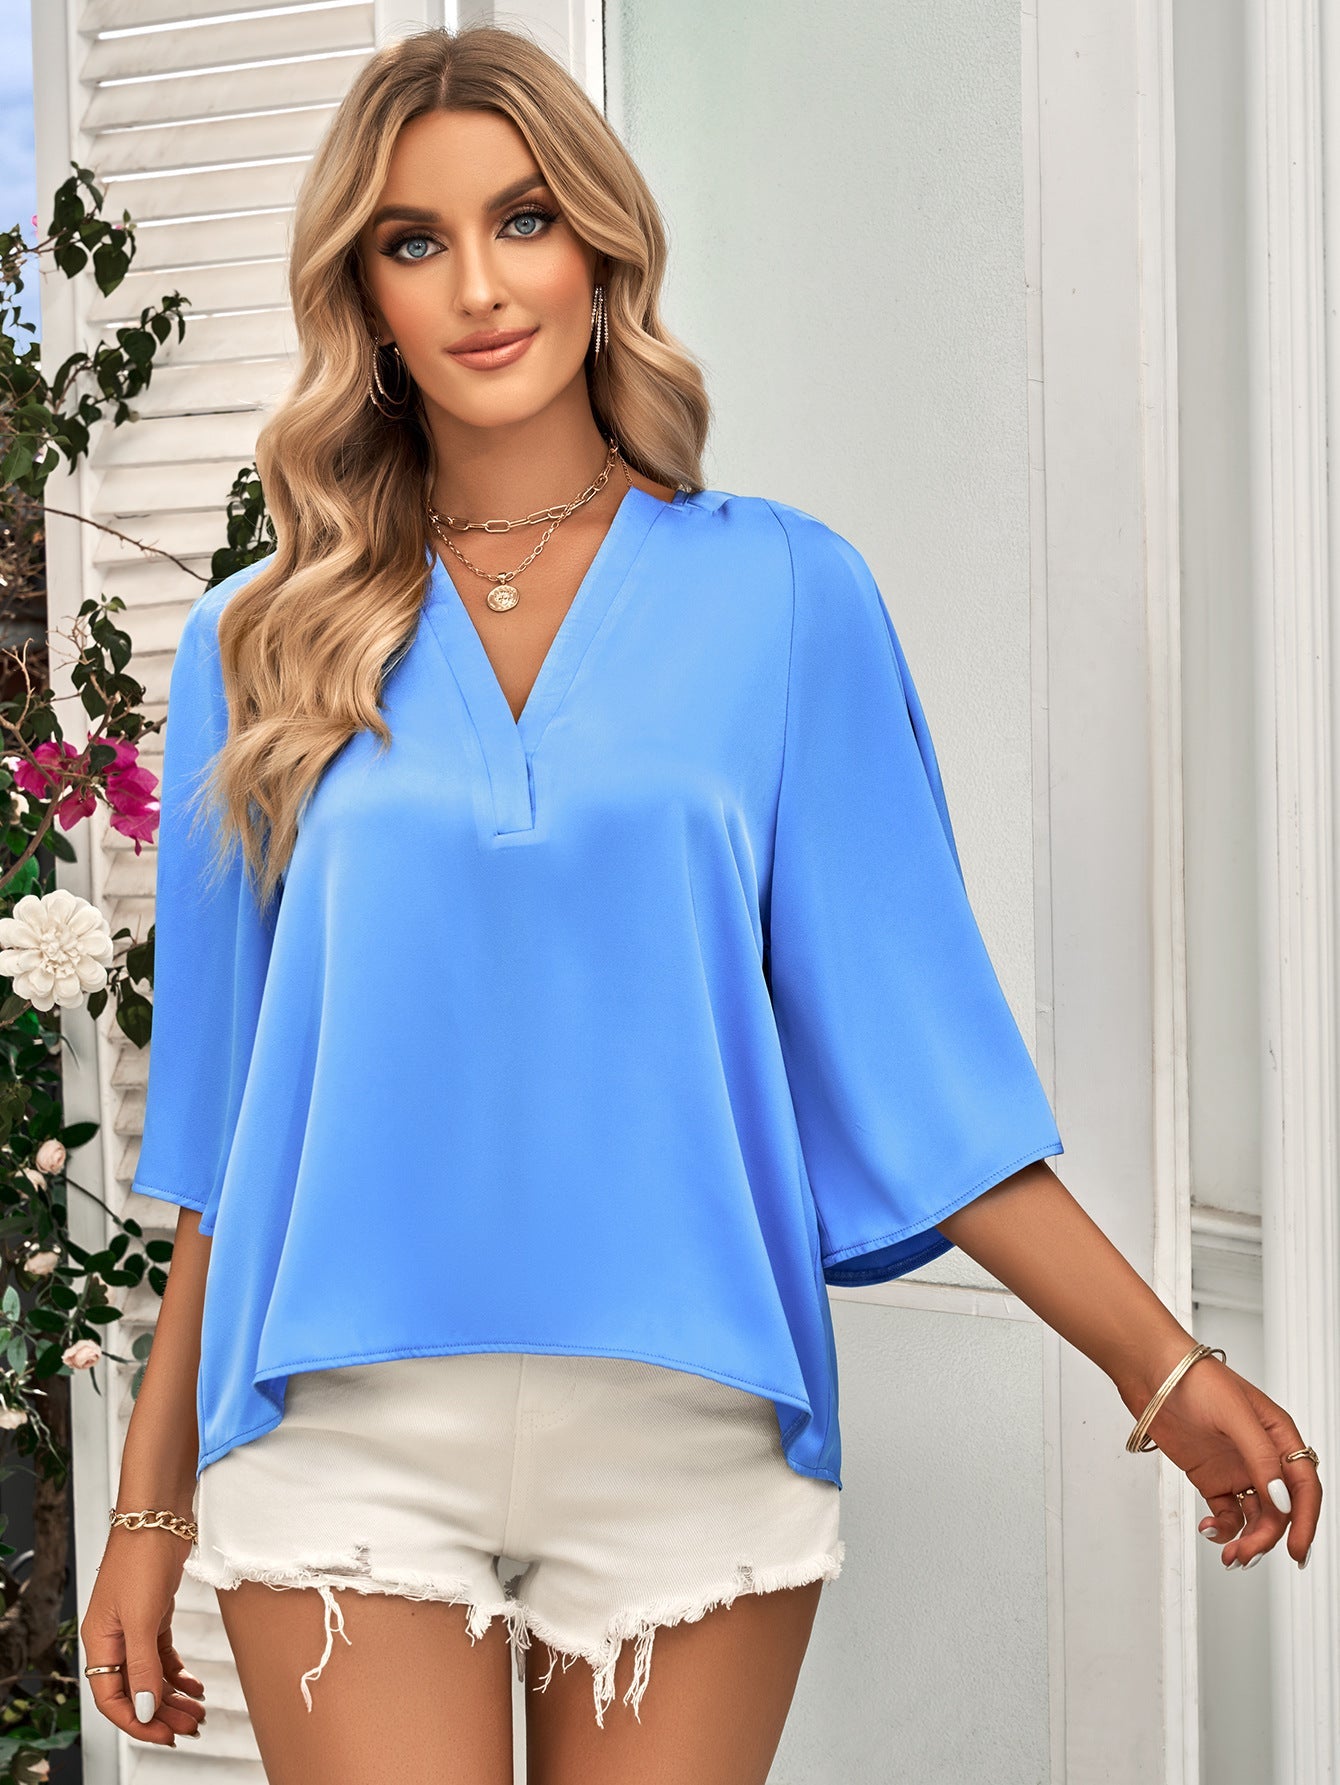 A casual and versatile top, suitable for a wide range of occasions and outfits, offering flexibility and comfort in your wardrobe.